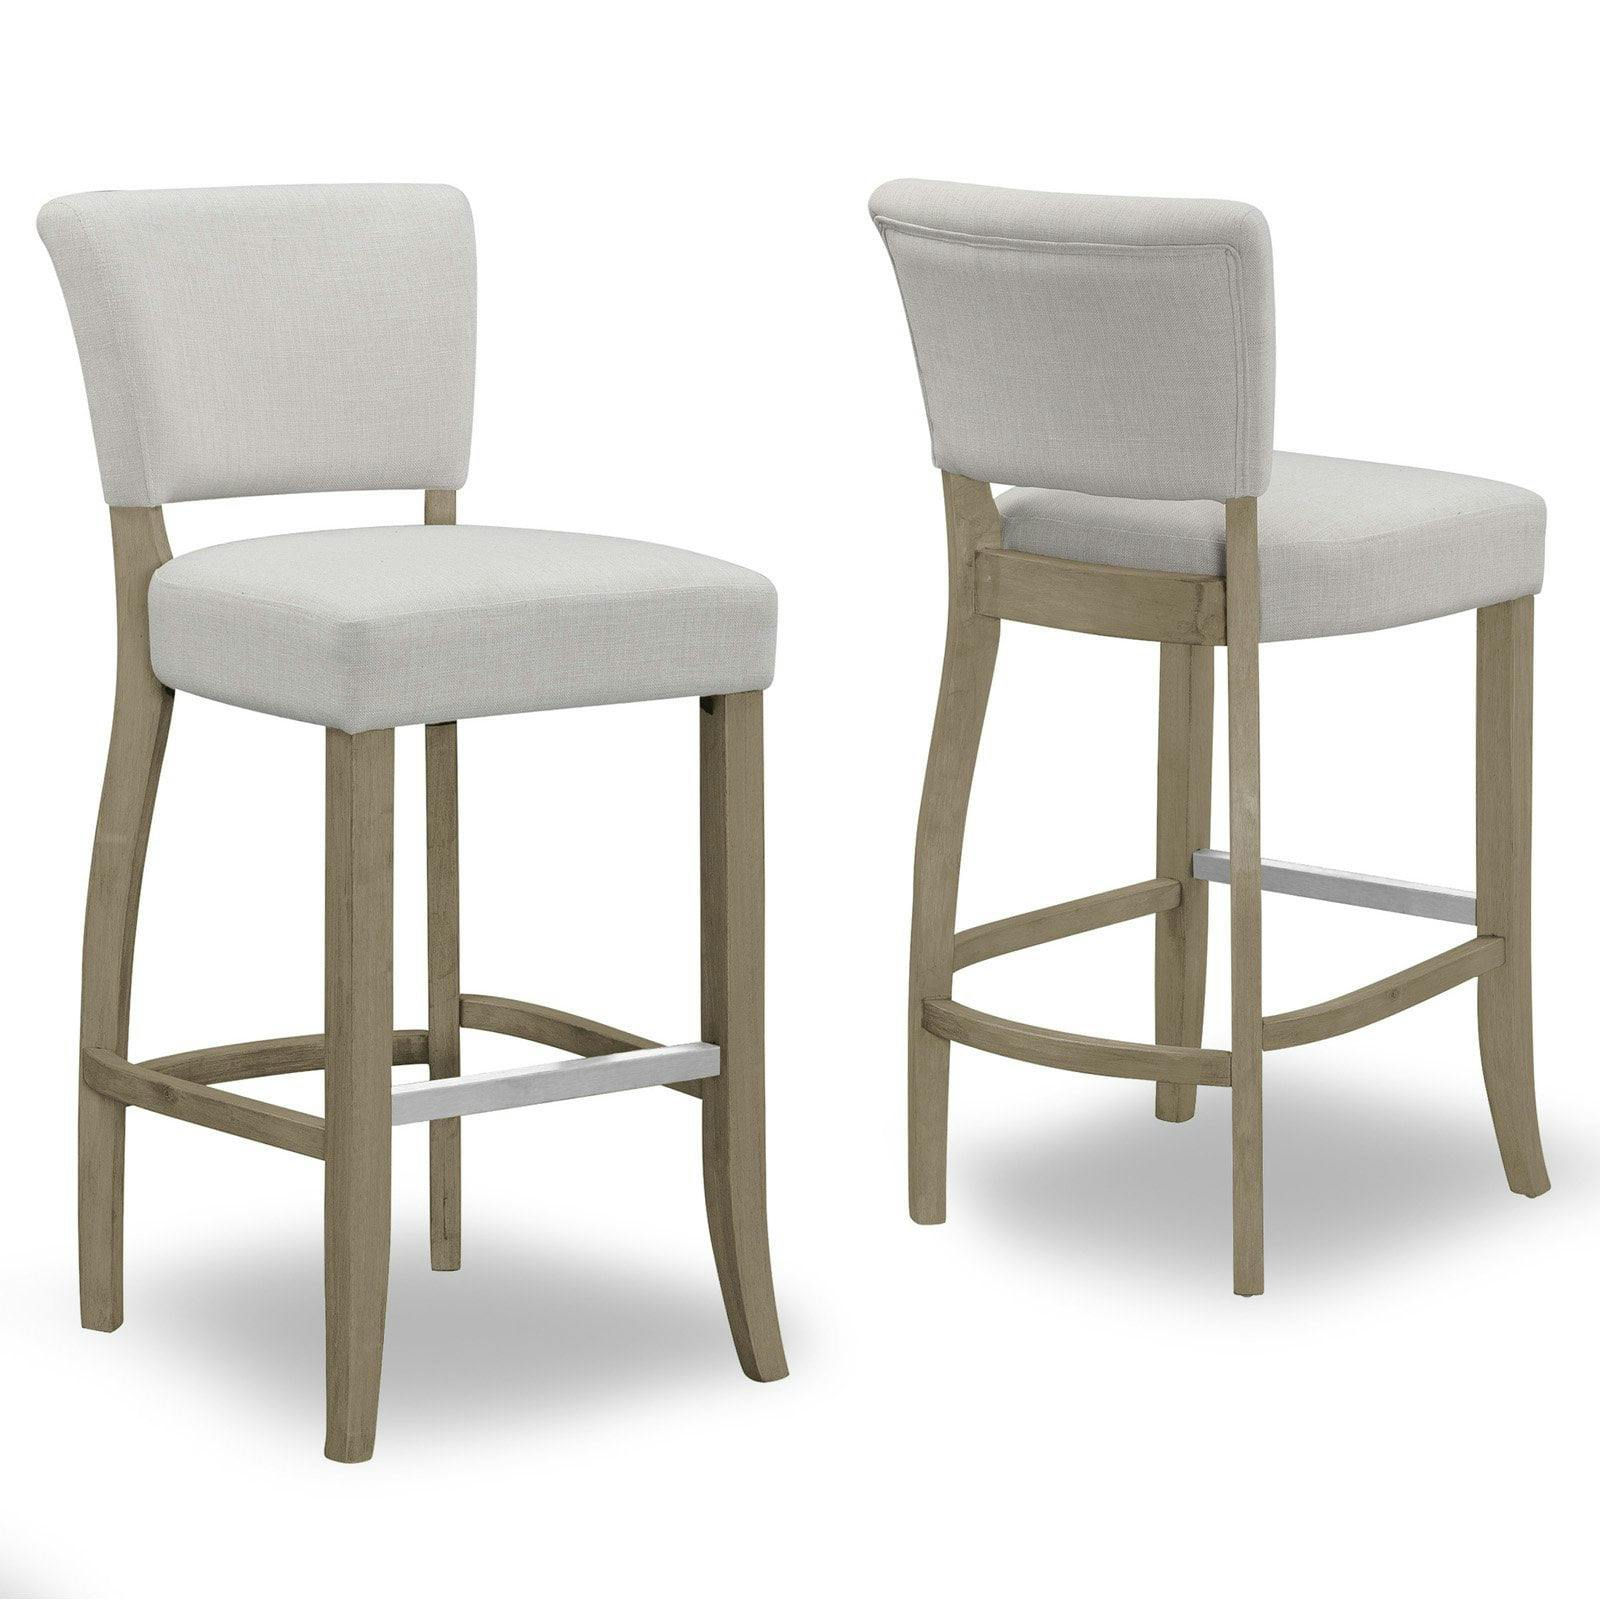 Classic Beige Upholstered Bar Stool with Antique Wood Legs